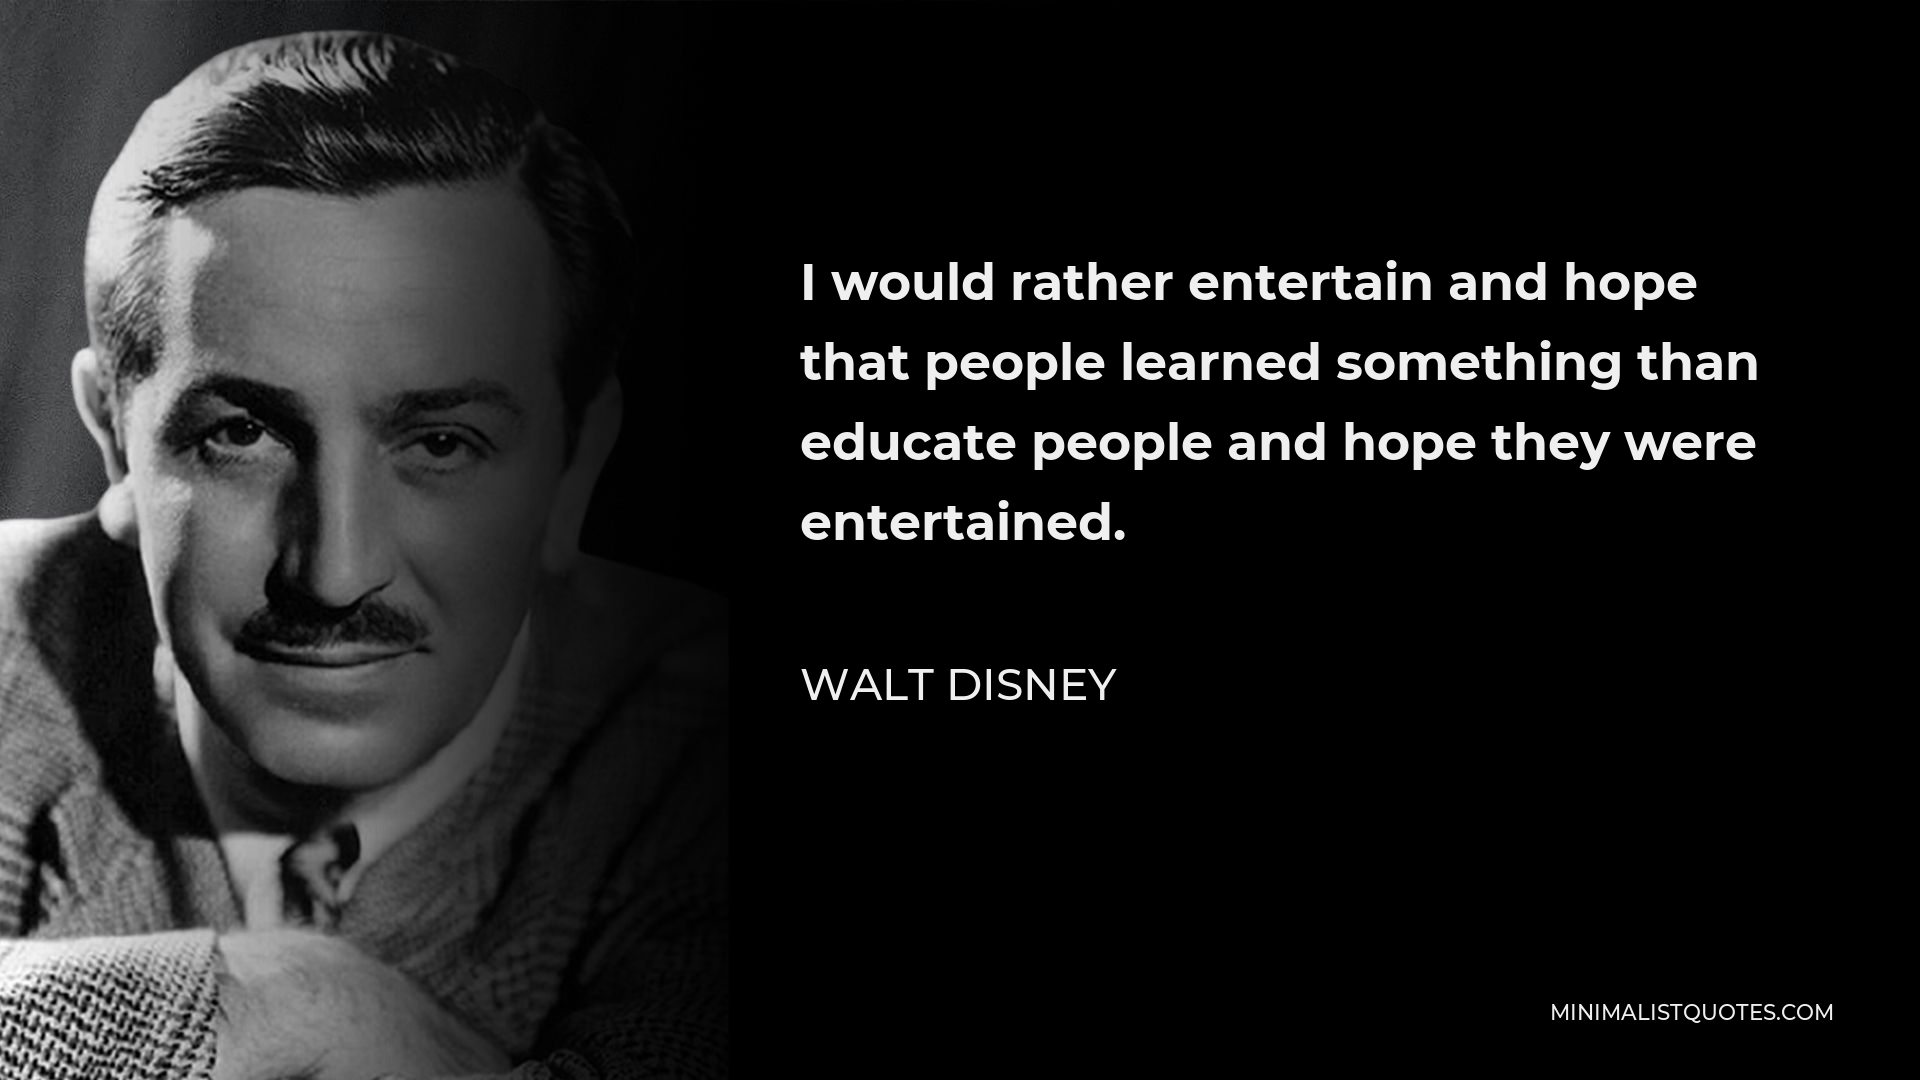 Walt Disney Quote - I would rather entertain and hope that people learned something than educate people and hope they were entertained.